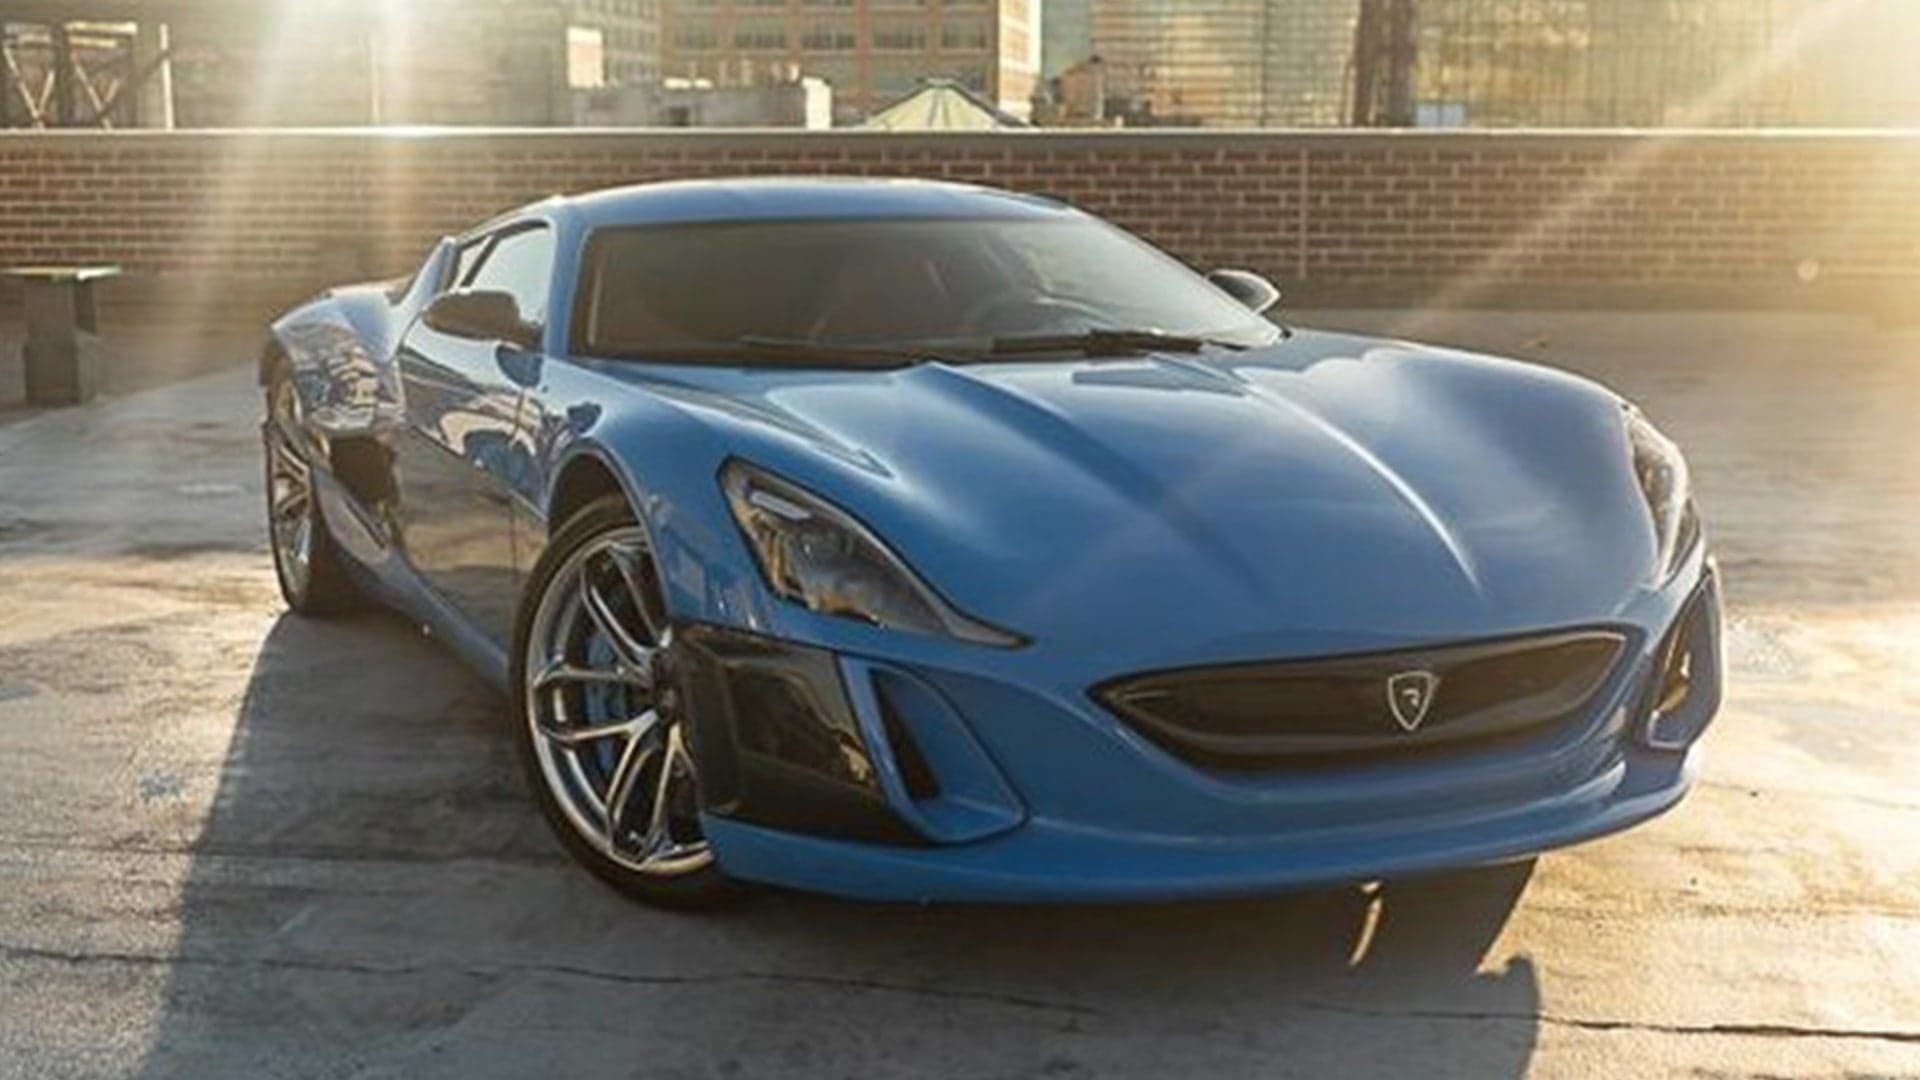 Now’s Your Chance to Buy the Only 220-MPH Rimac Concept One on the Market